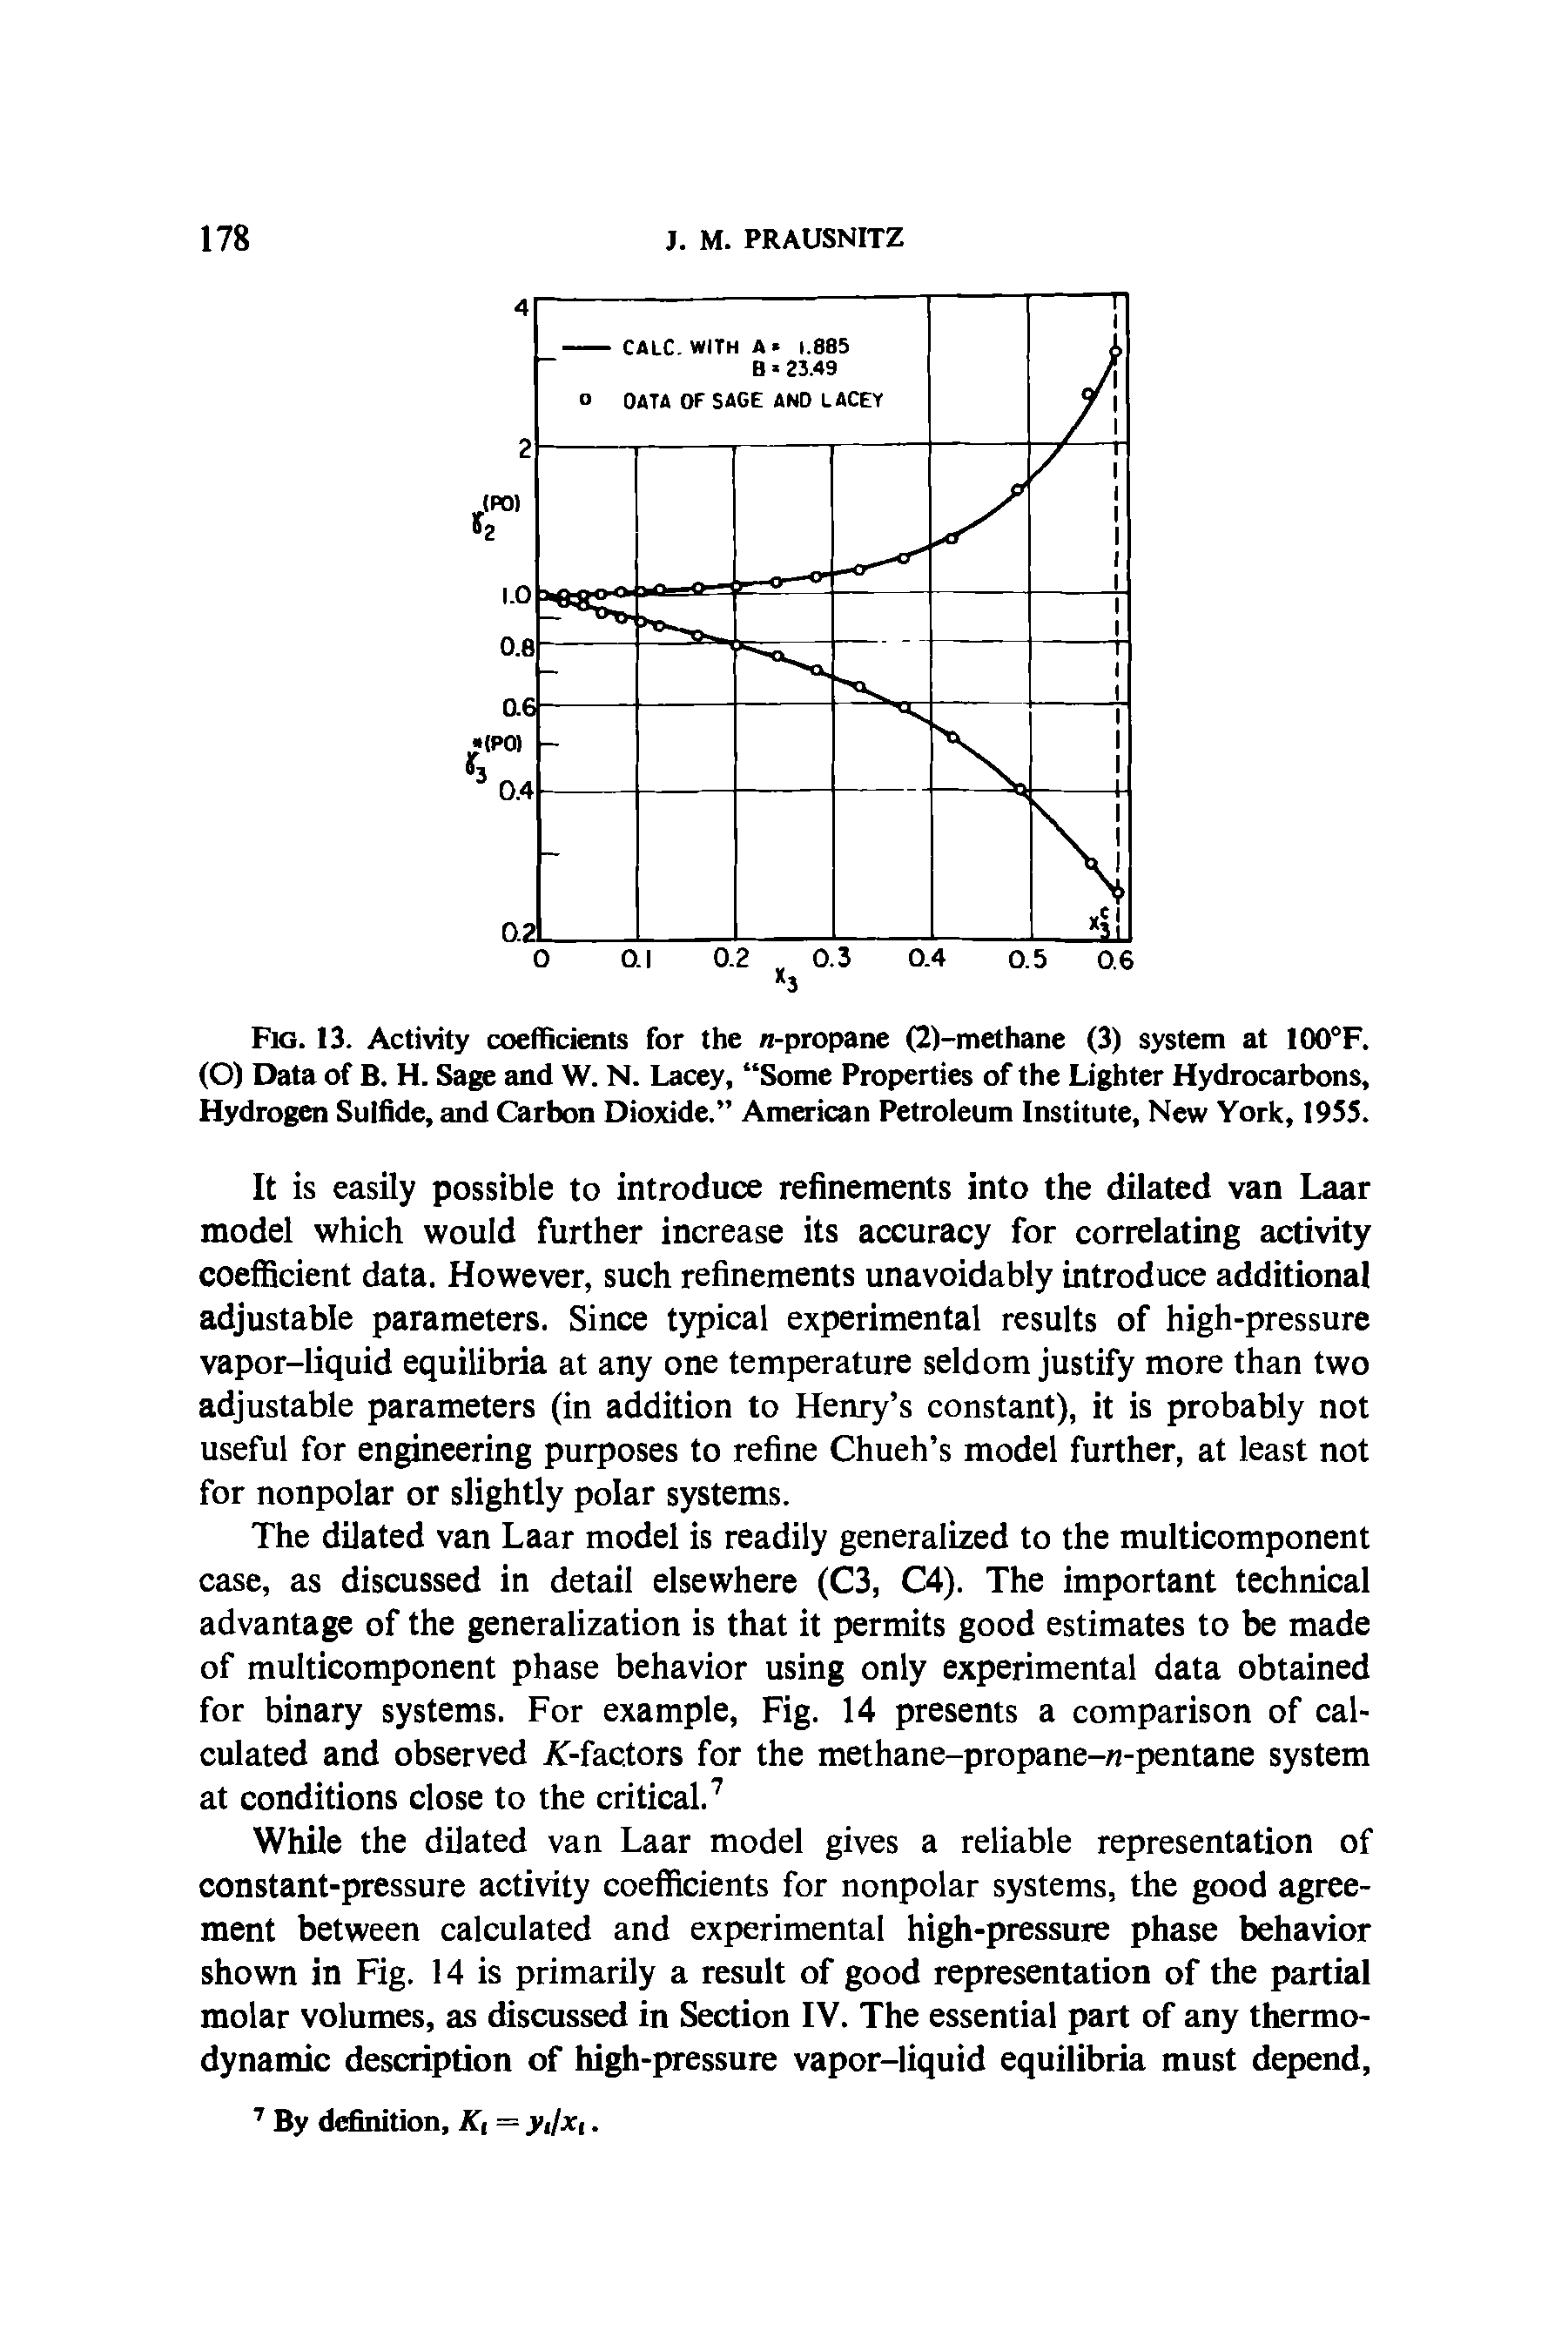 Fig. 13. Activity coefficients for the n-propane (2)-methane (3) system at 100°F. (O) Data of B. H. Sage and W. N. Lacey, Some Properties of the Lighter Hydrocarbons, Hydrogen Sulfide, and Carbon Dioxide. American Petroleum Institute, New York, 1955.